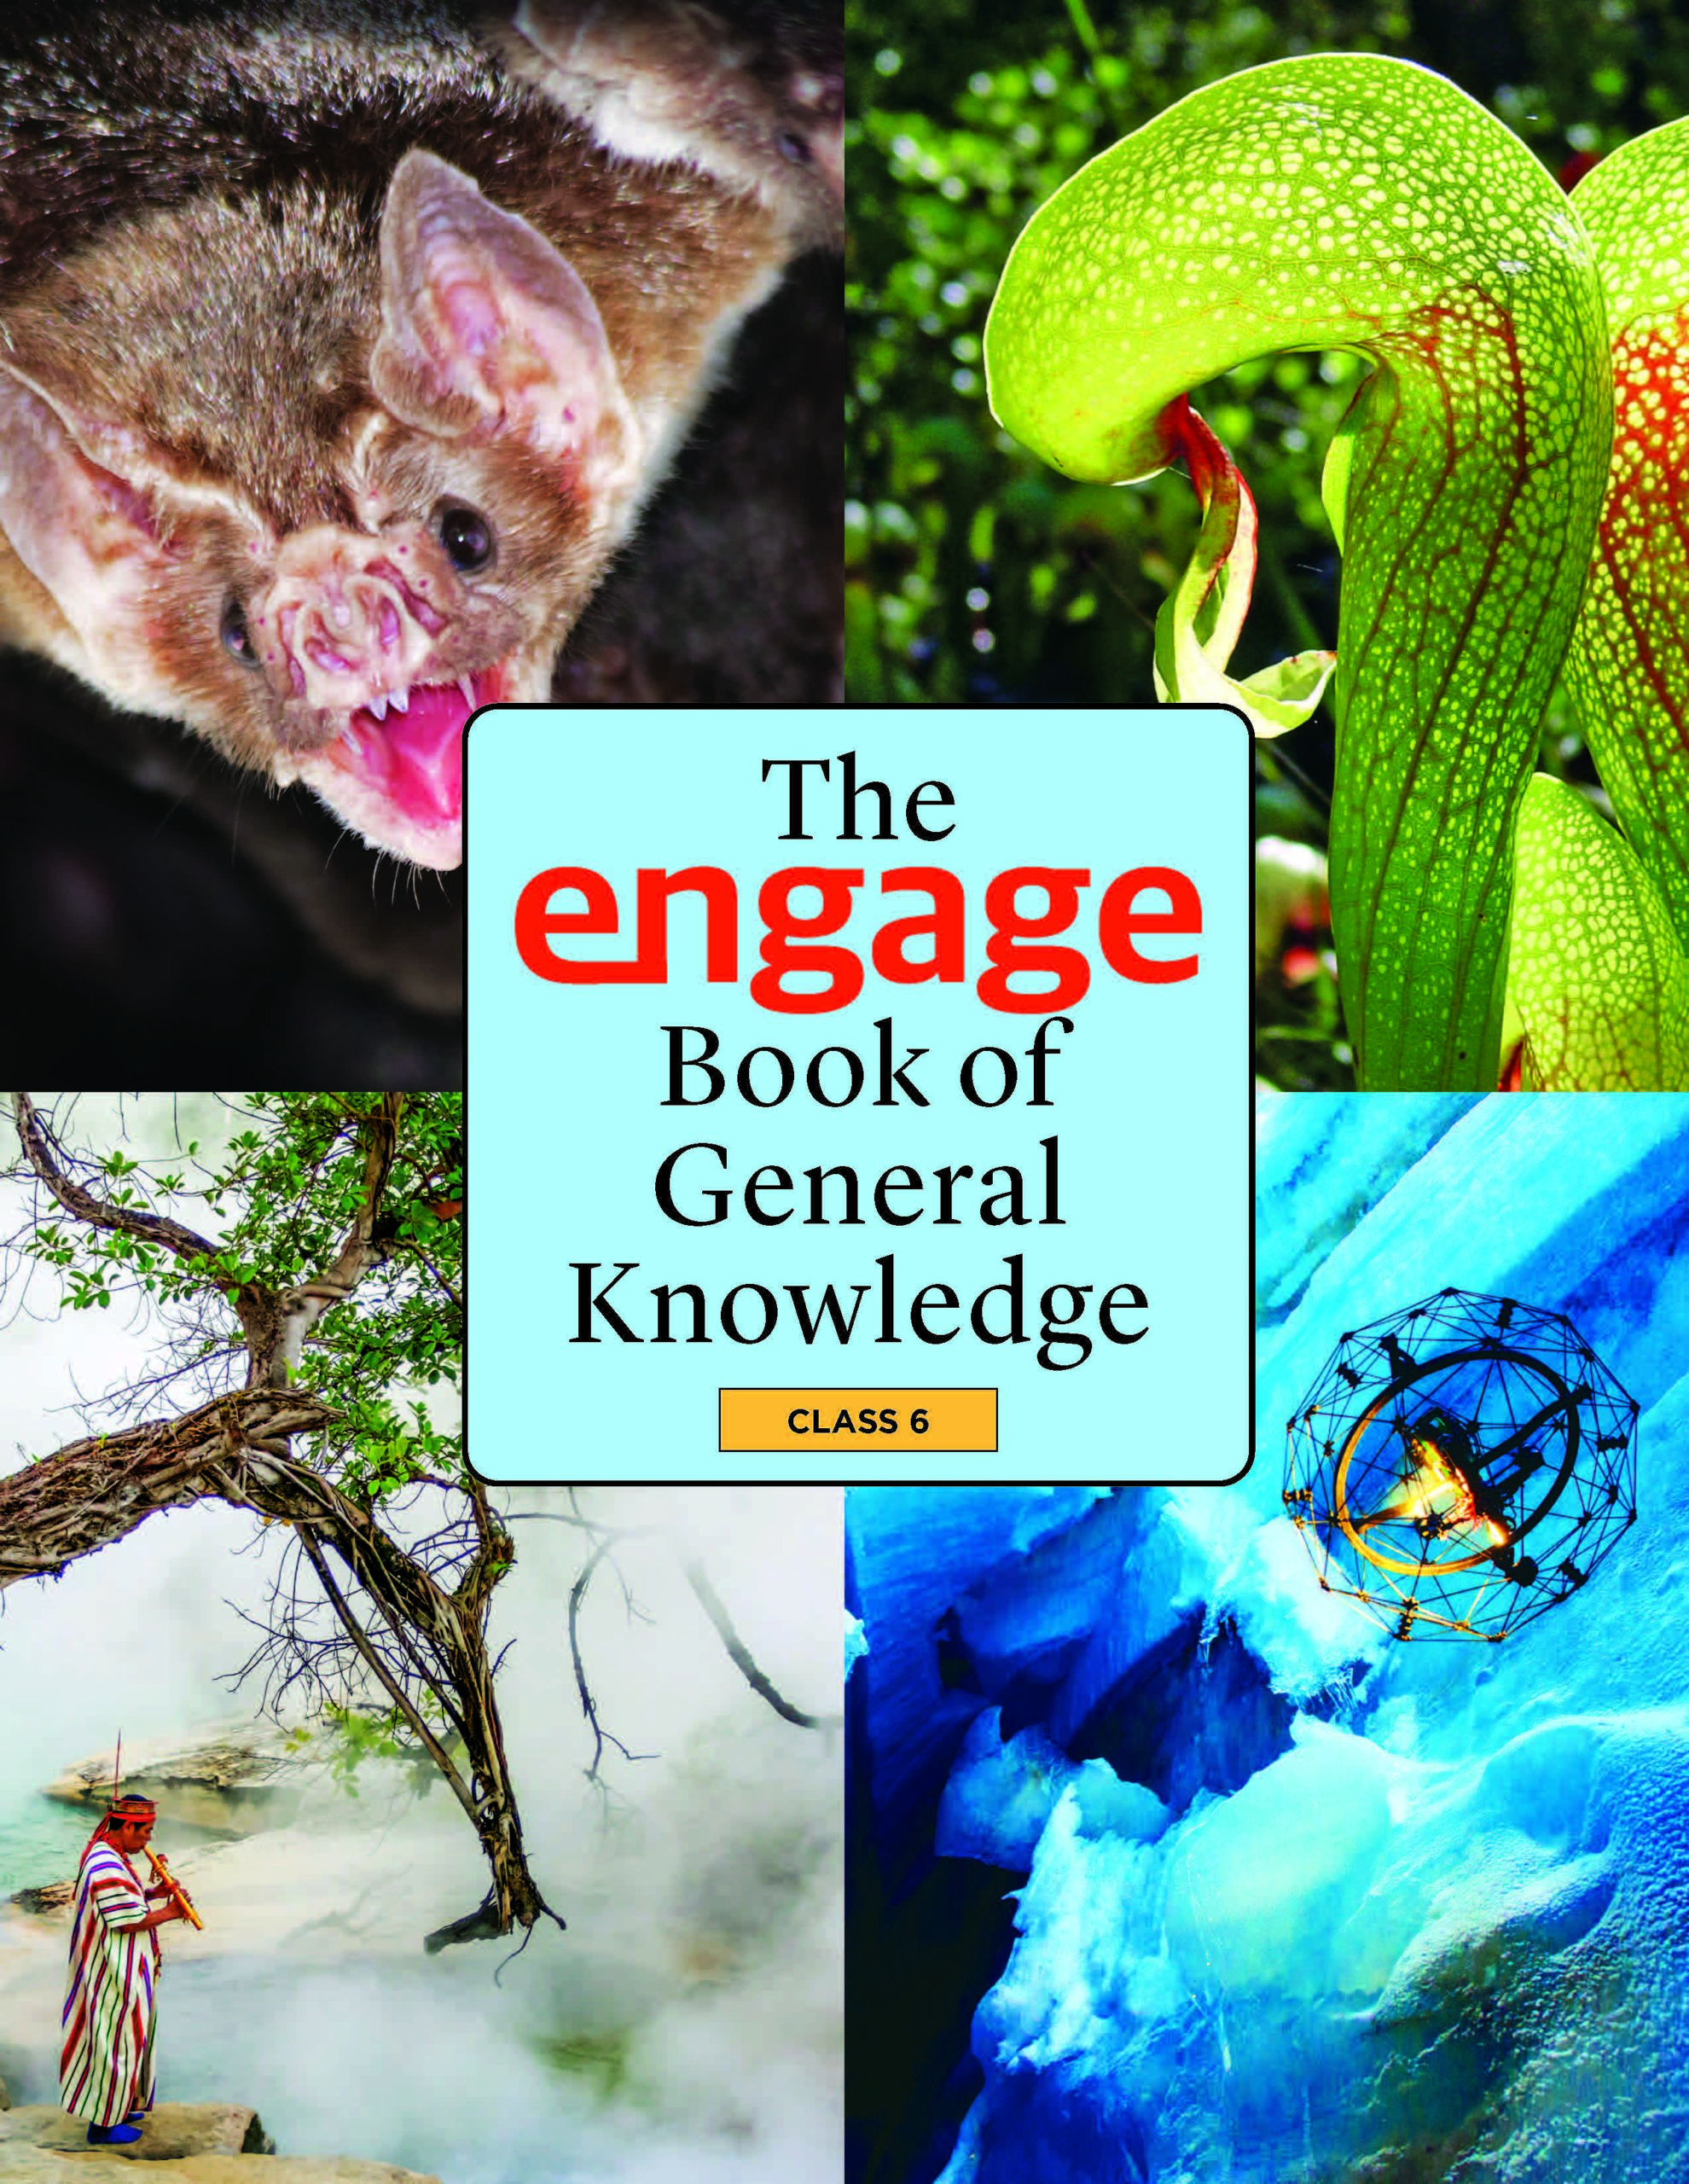 Book of General Knowledge – Class 6 | Engage Learning